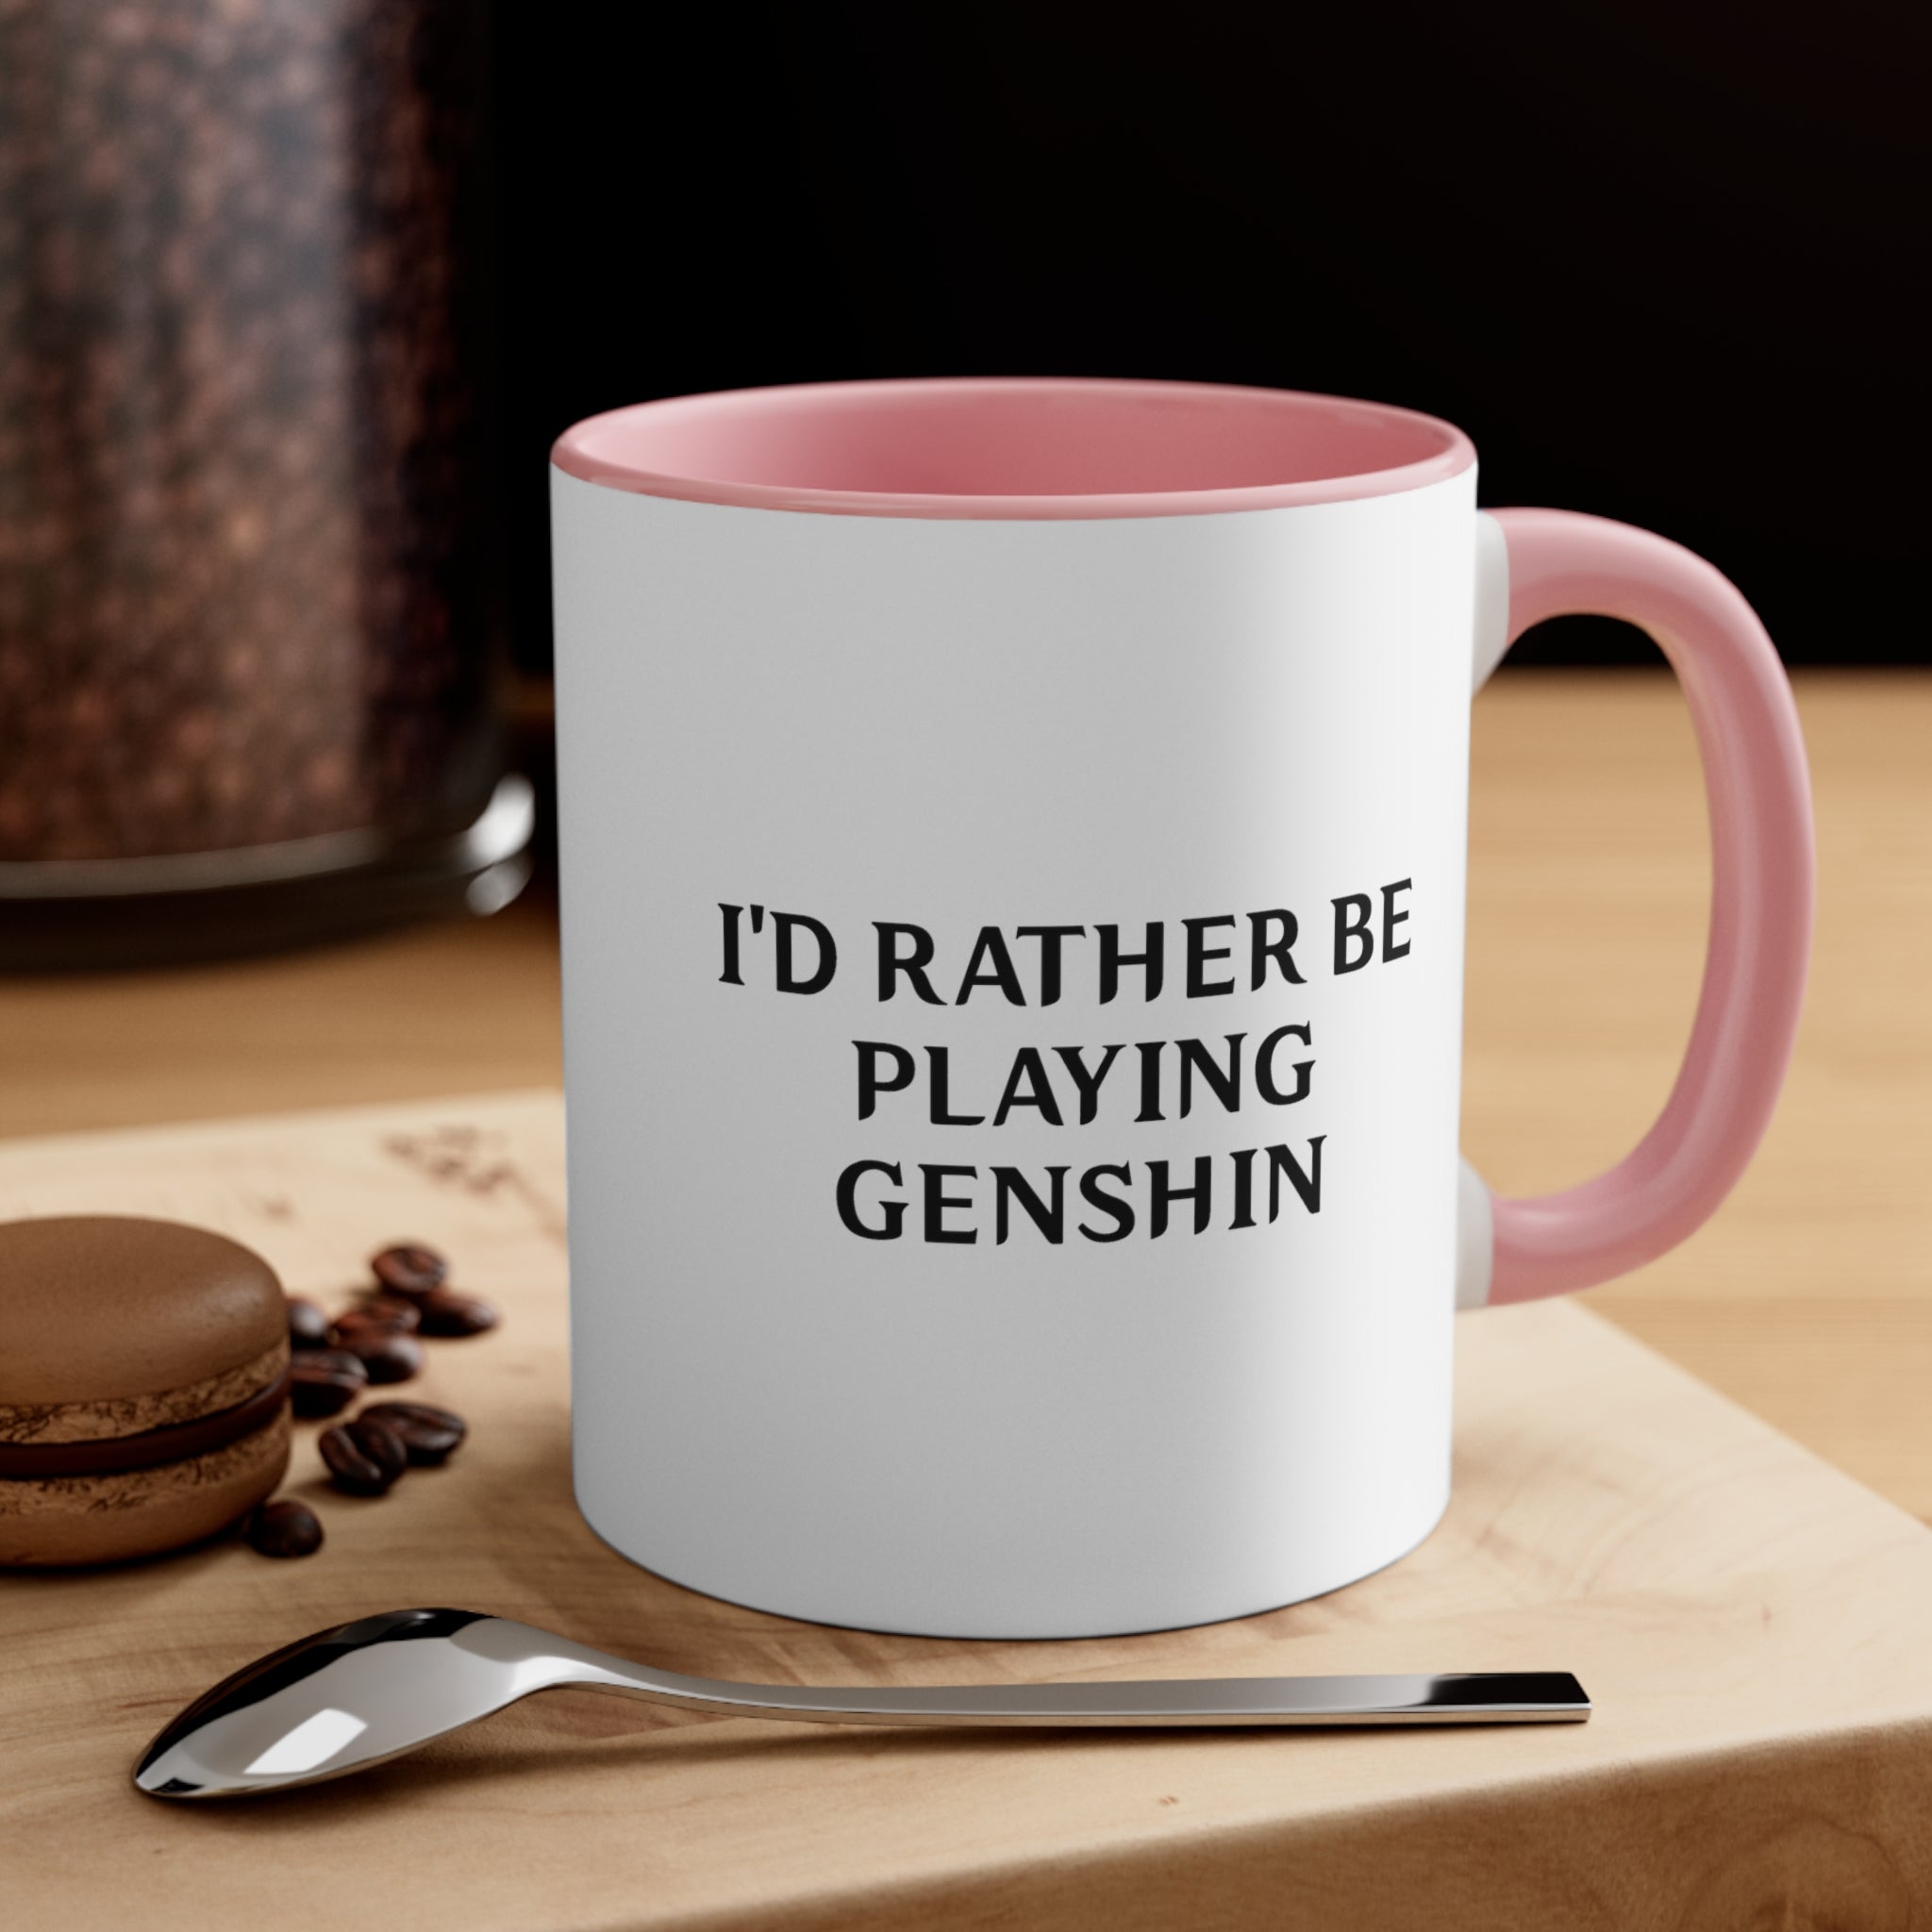 Genshin Impact I'd Rather Be Playing Coffee Mug, 11oz Cups Mugs Cup Gamer Gift For Him Her Game Cup Cups Mugs Birthday Christmas Valentine's Anniversary Gifts